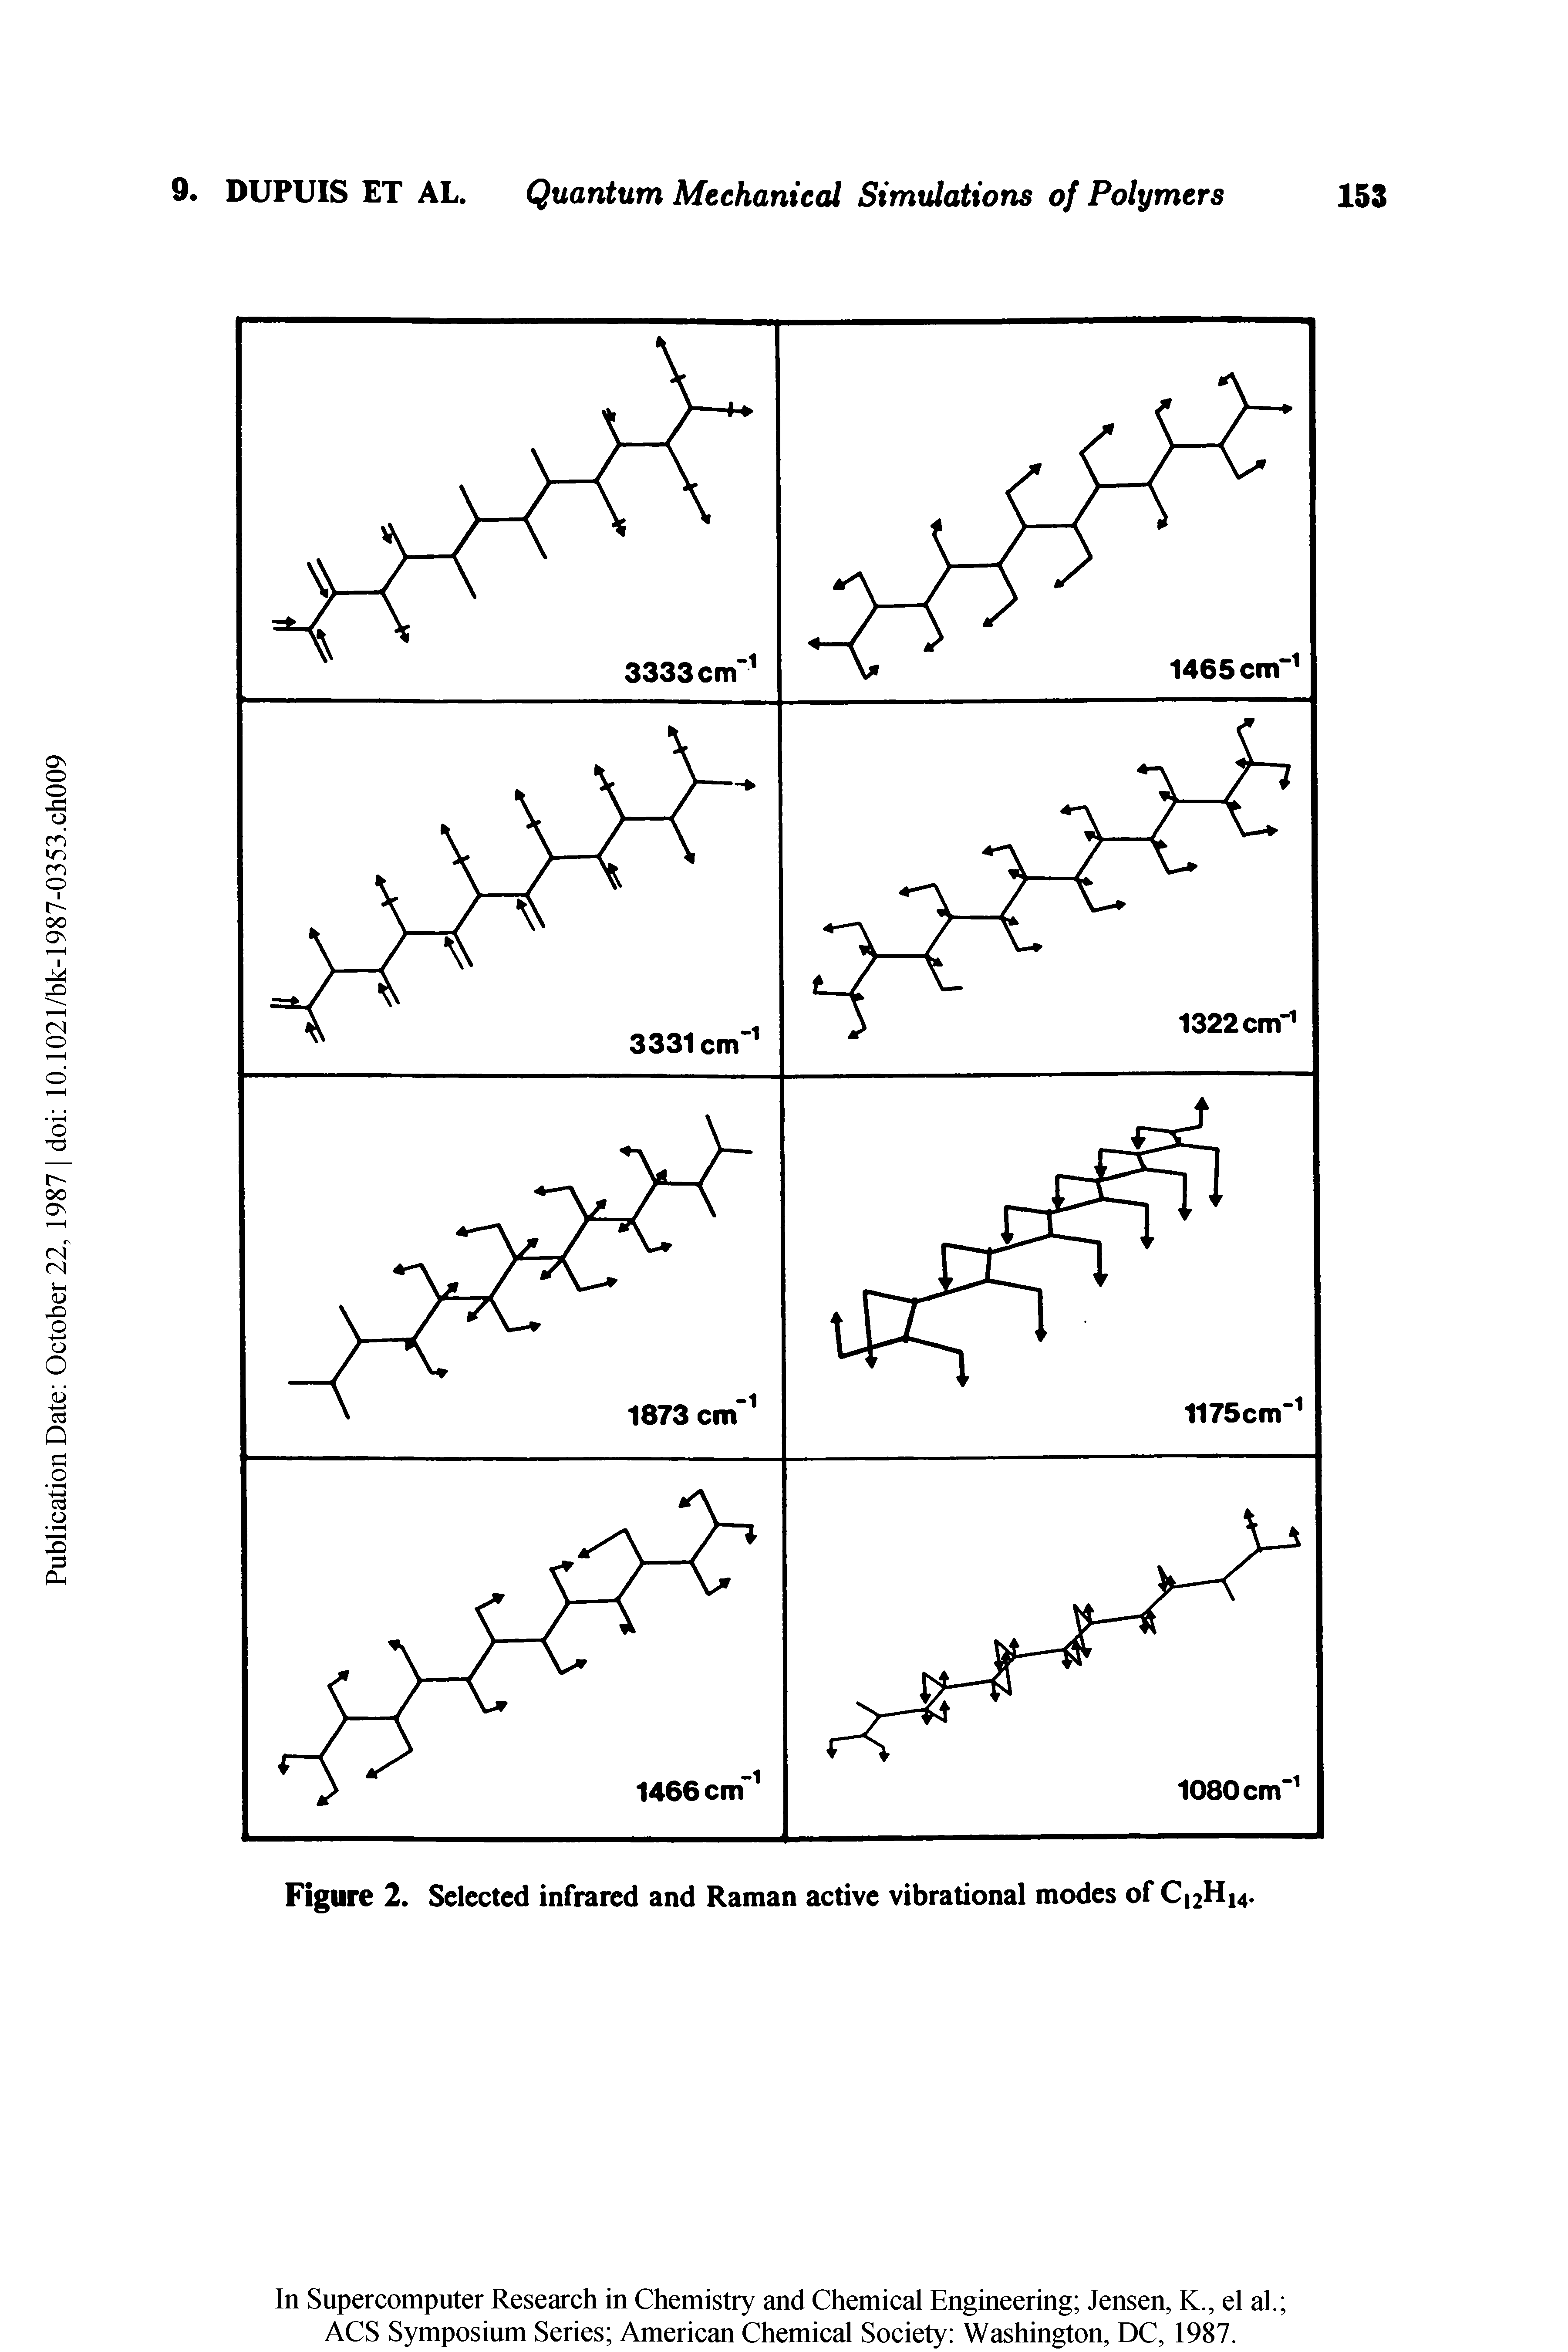 Figure 2. Selected infrared and Raman active vibrational modes of C12H14.